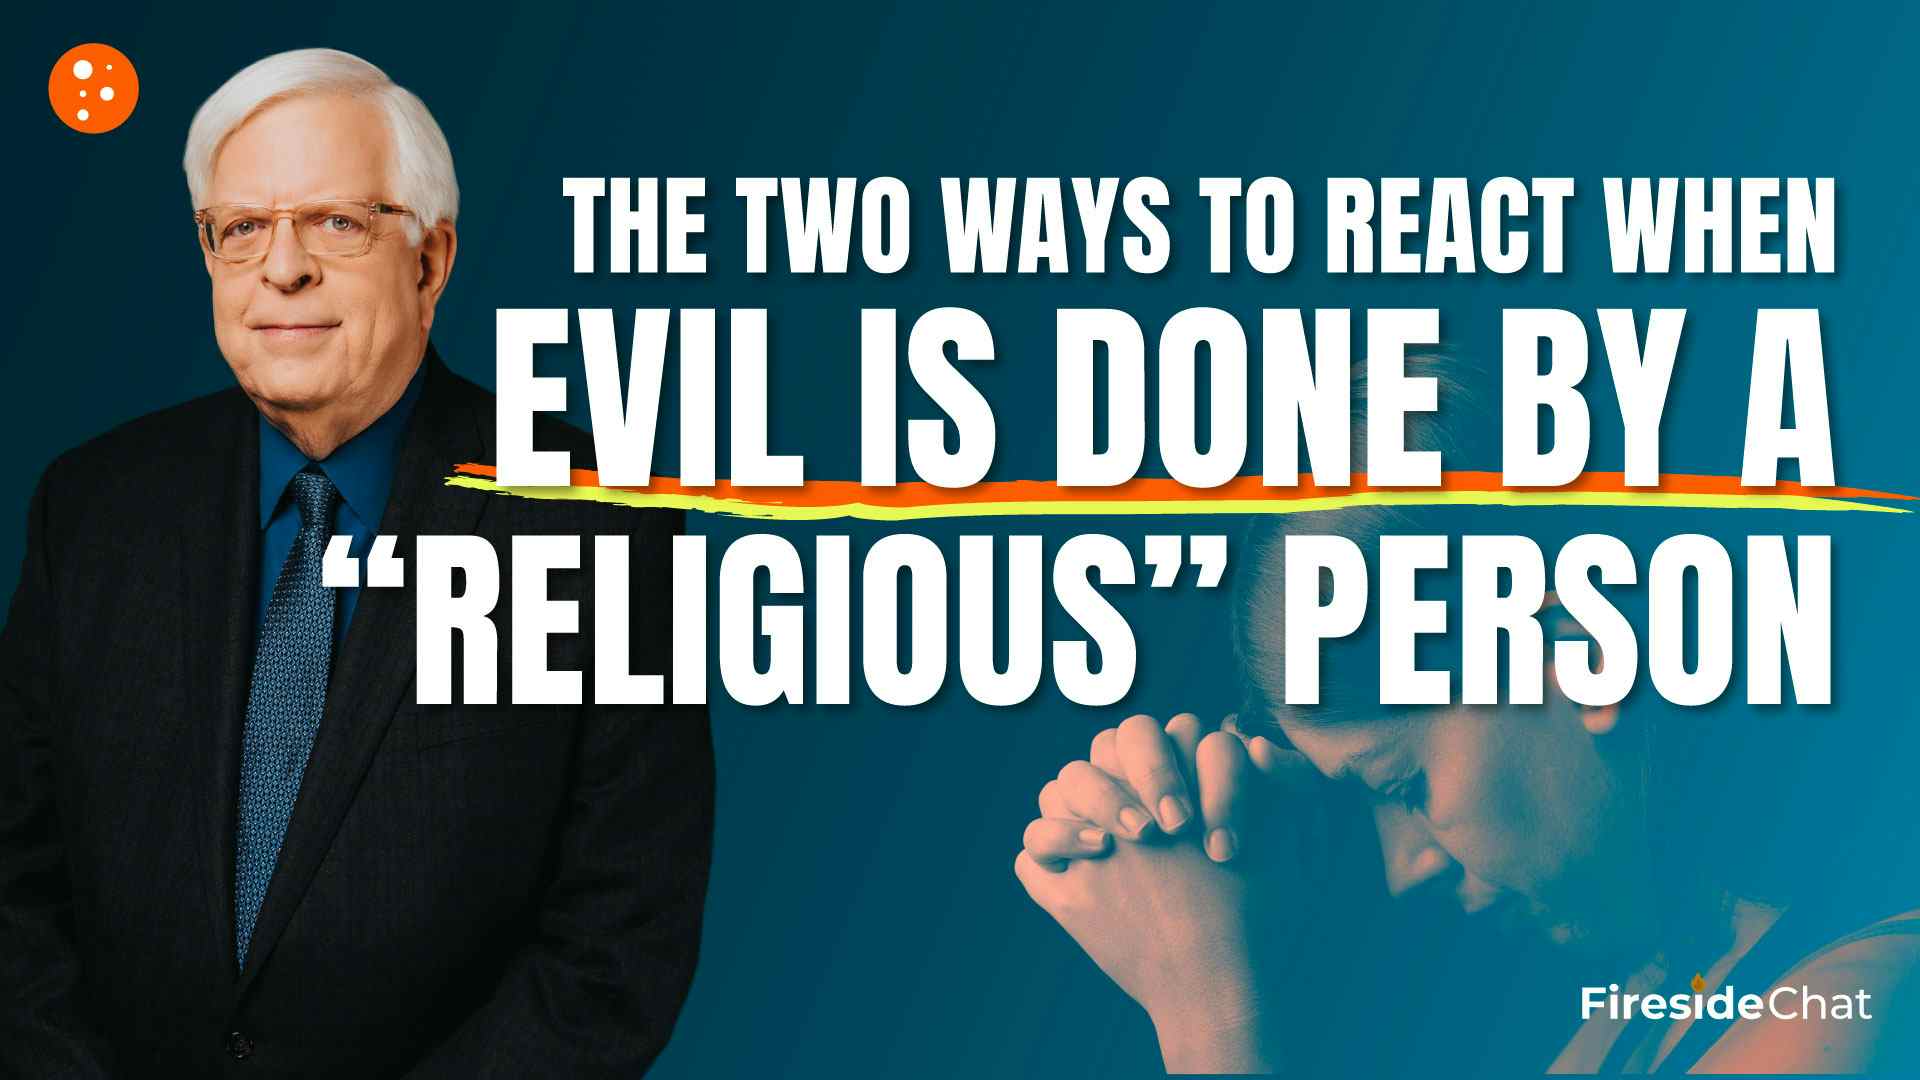 The Two Ways to React When Evil Is Done by a "Religious" Person